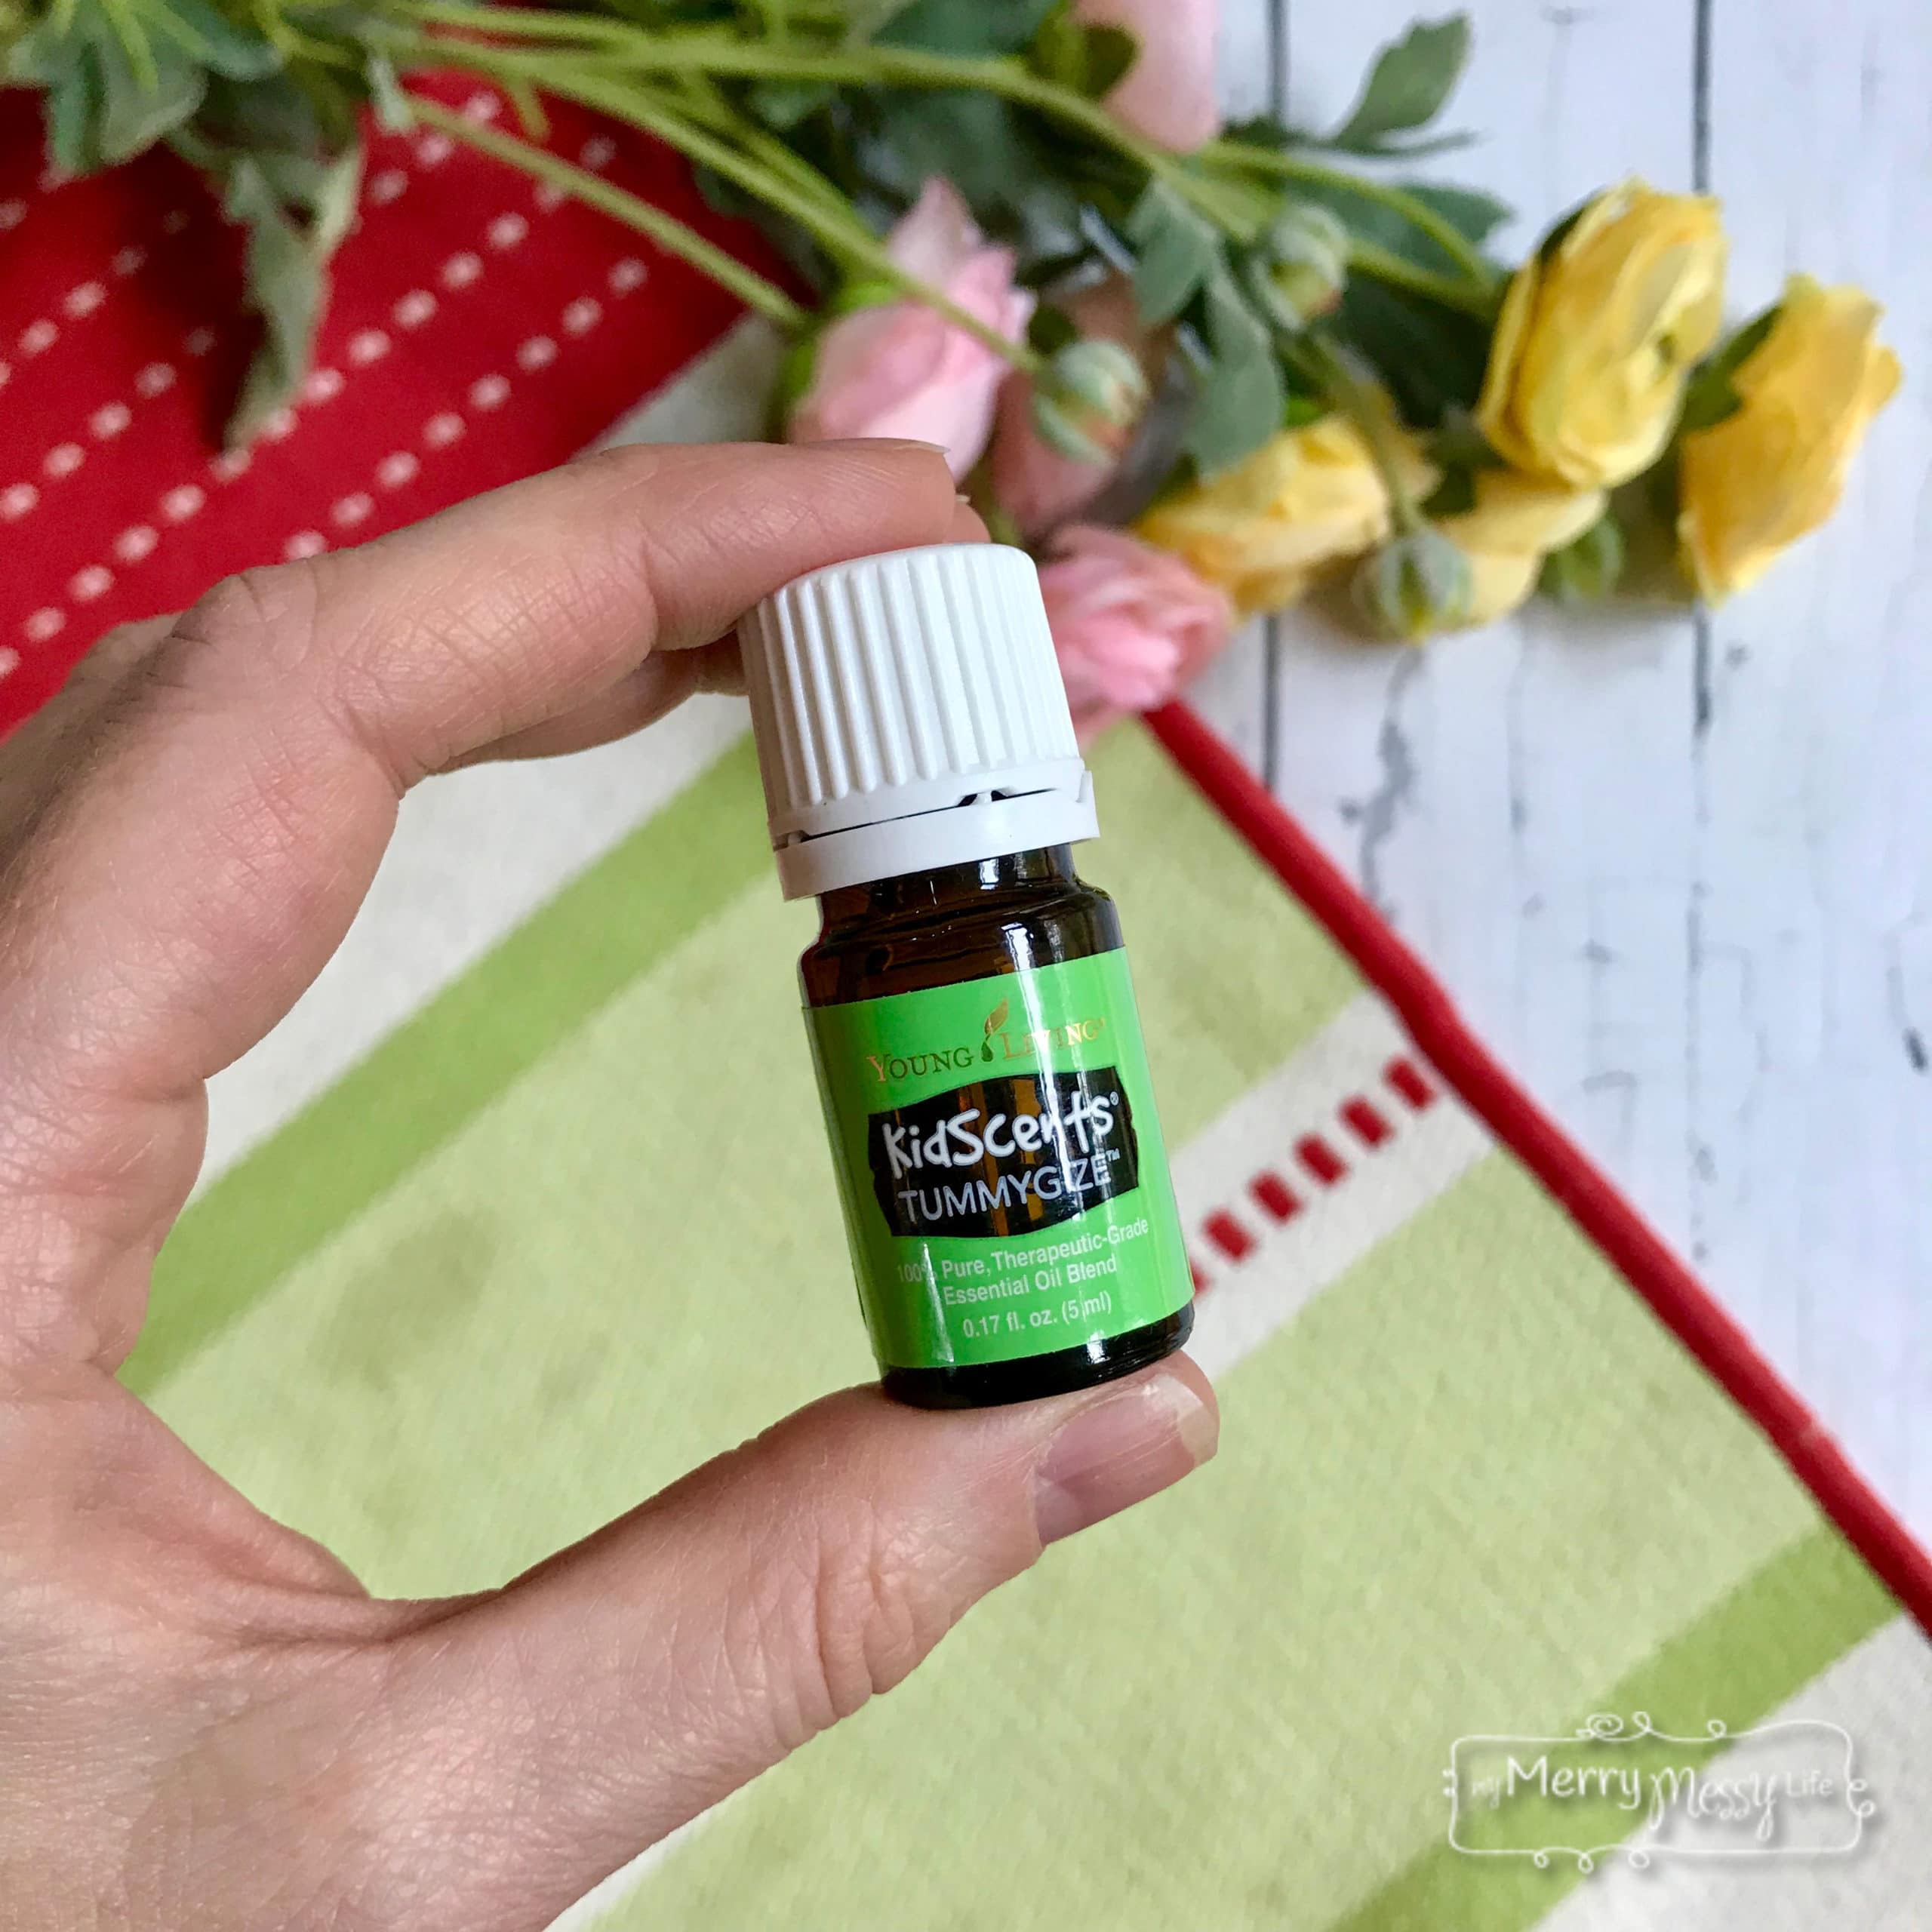 TummyGize Essential Oil Blend for Kids from Young Living Essential Oils